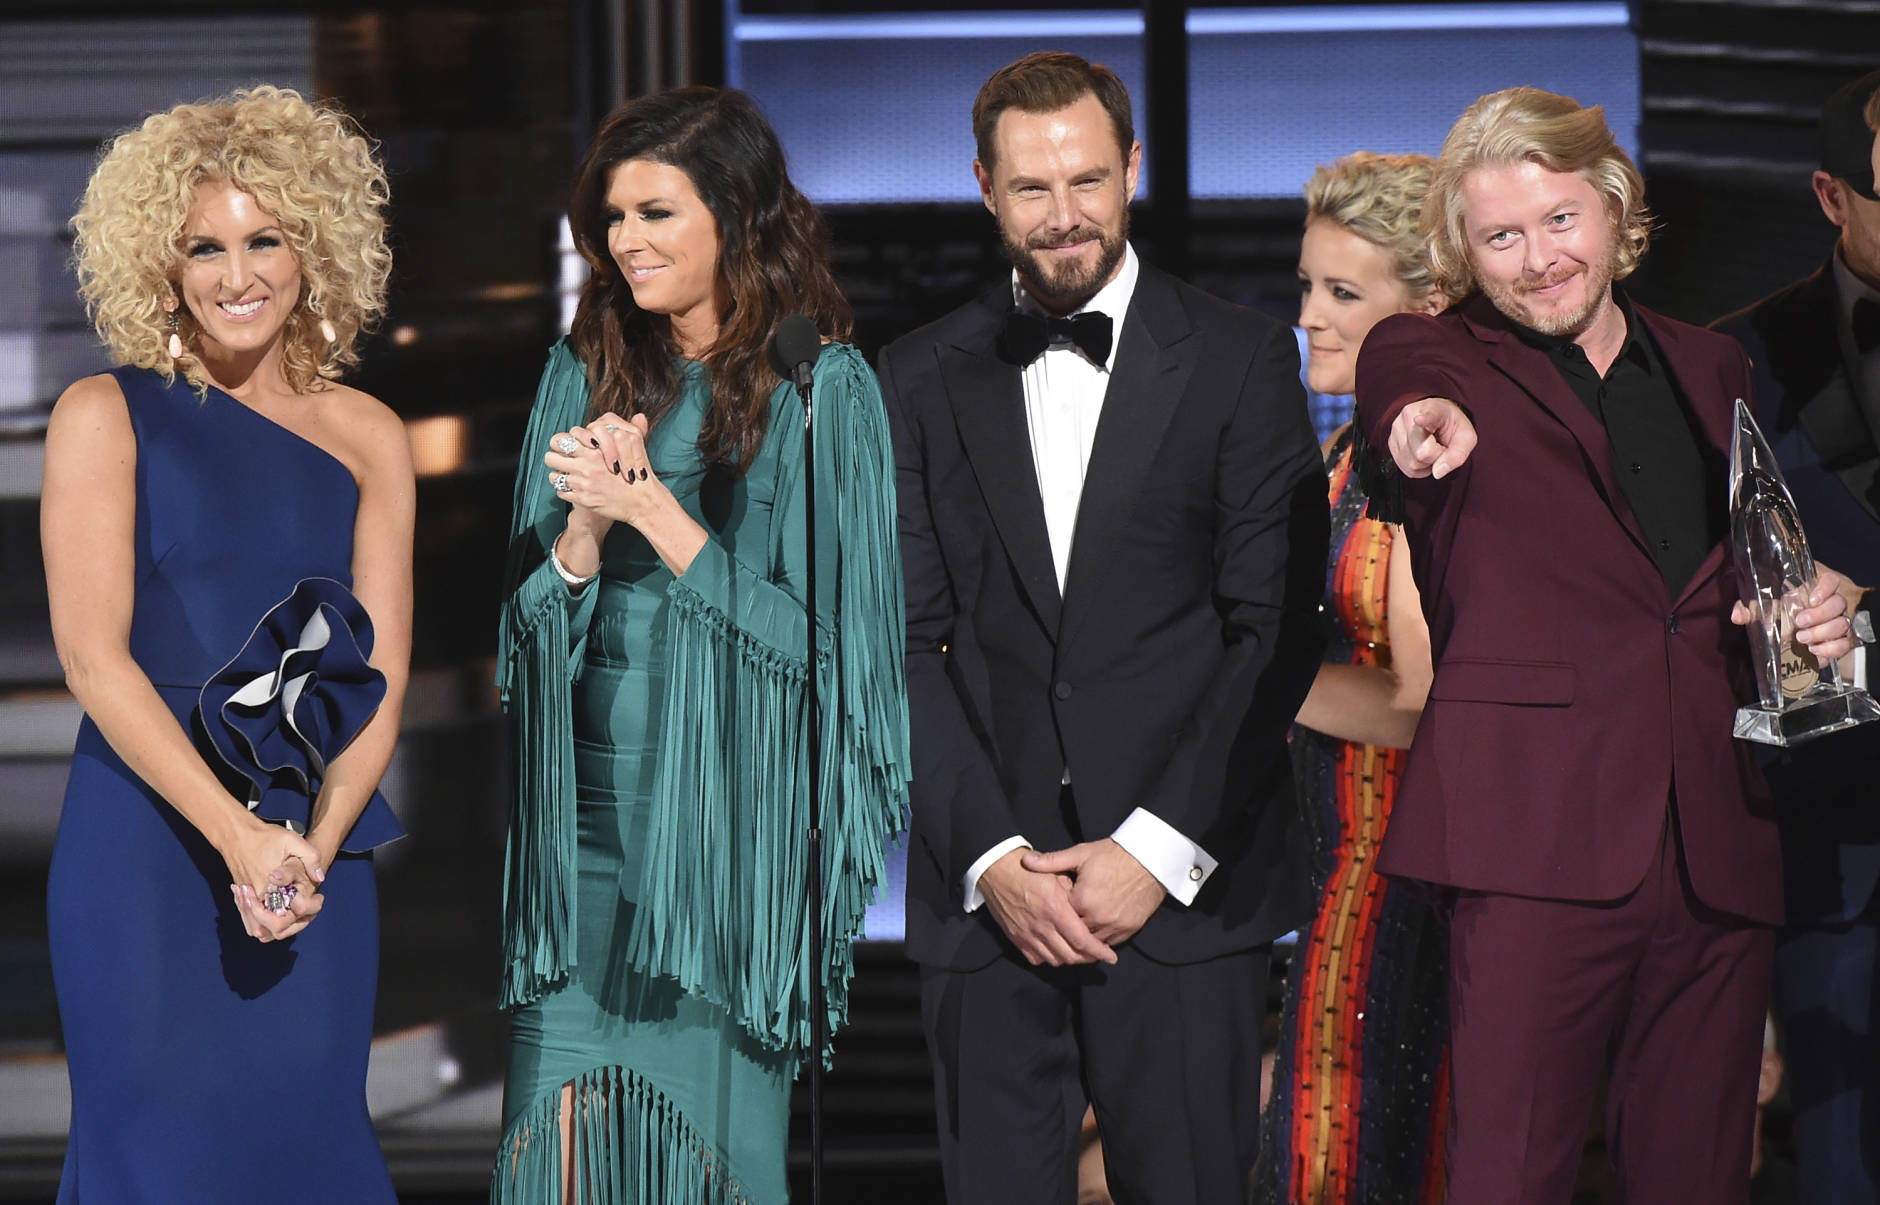 Little Big Town, from left, Kimberly Schlapman, Karen Fairchild, Jimi Westbrook, and Phillip Sweet accept the award for vocal group of the year at the 50th annual CMA Awards at the Bridgestone Arena on Wednesday, Nov. 2, 2016, in Nashville, Tenn. (Photo by Charles Sykes/Invision/AP)